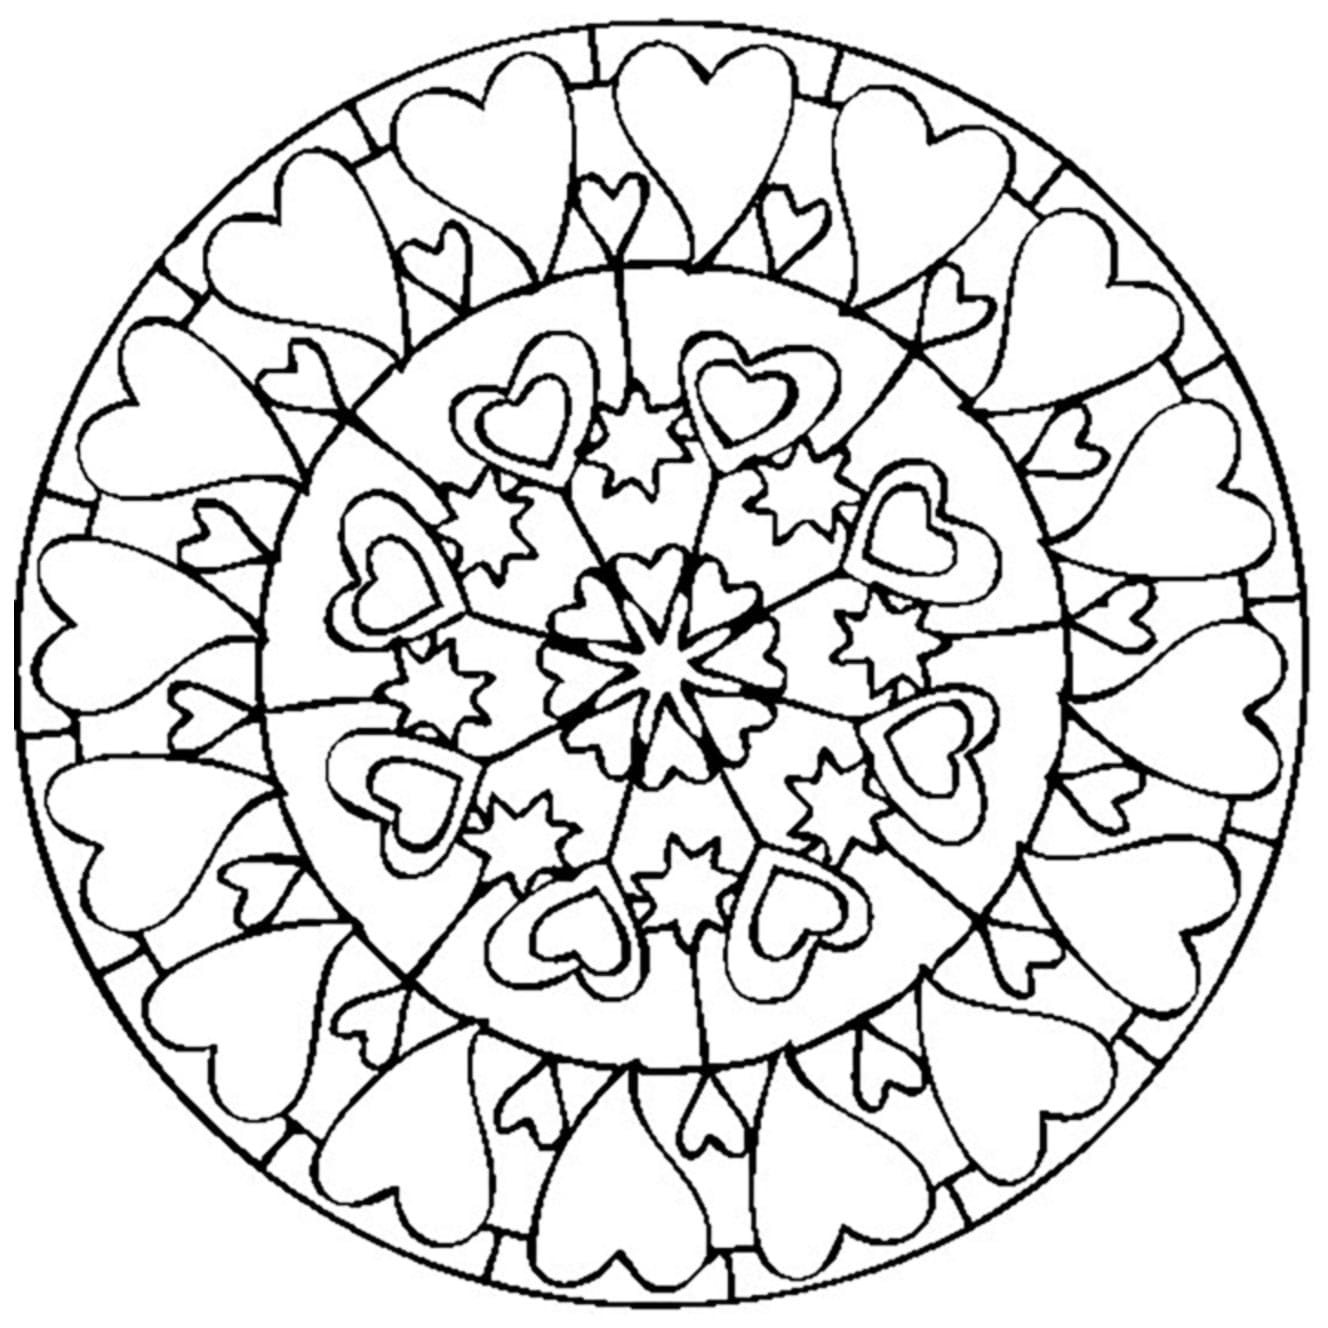 The Love Mandala Perfect for Valentine’s Day